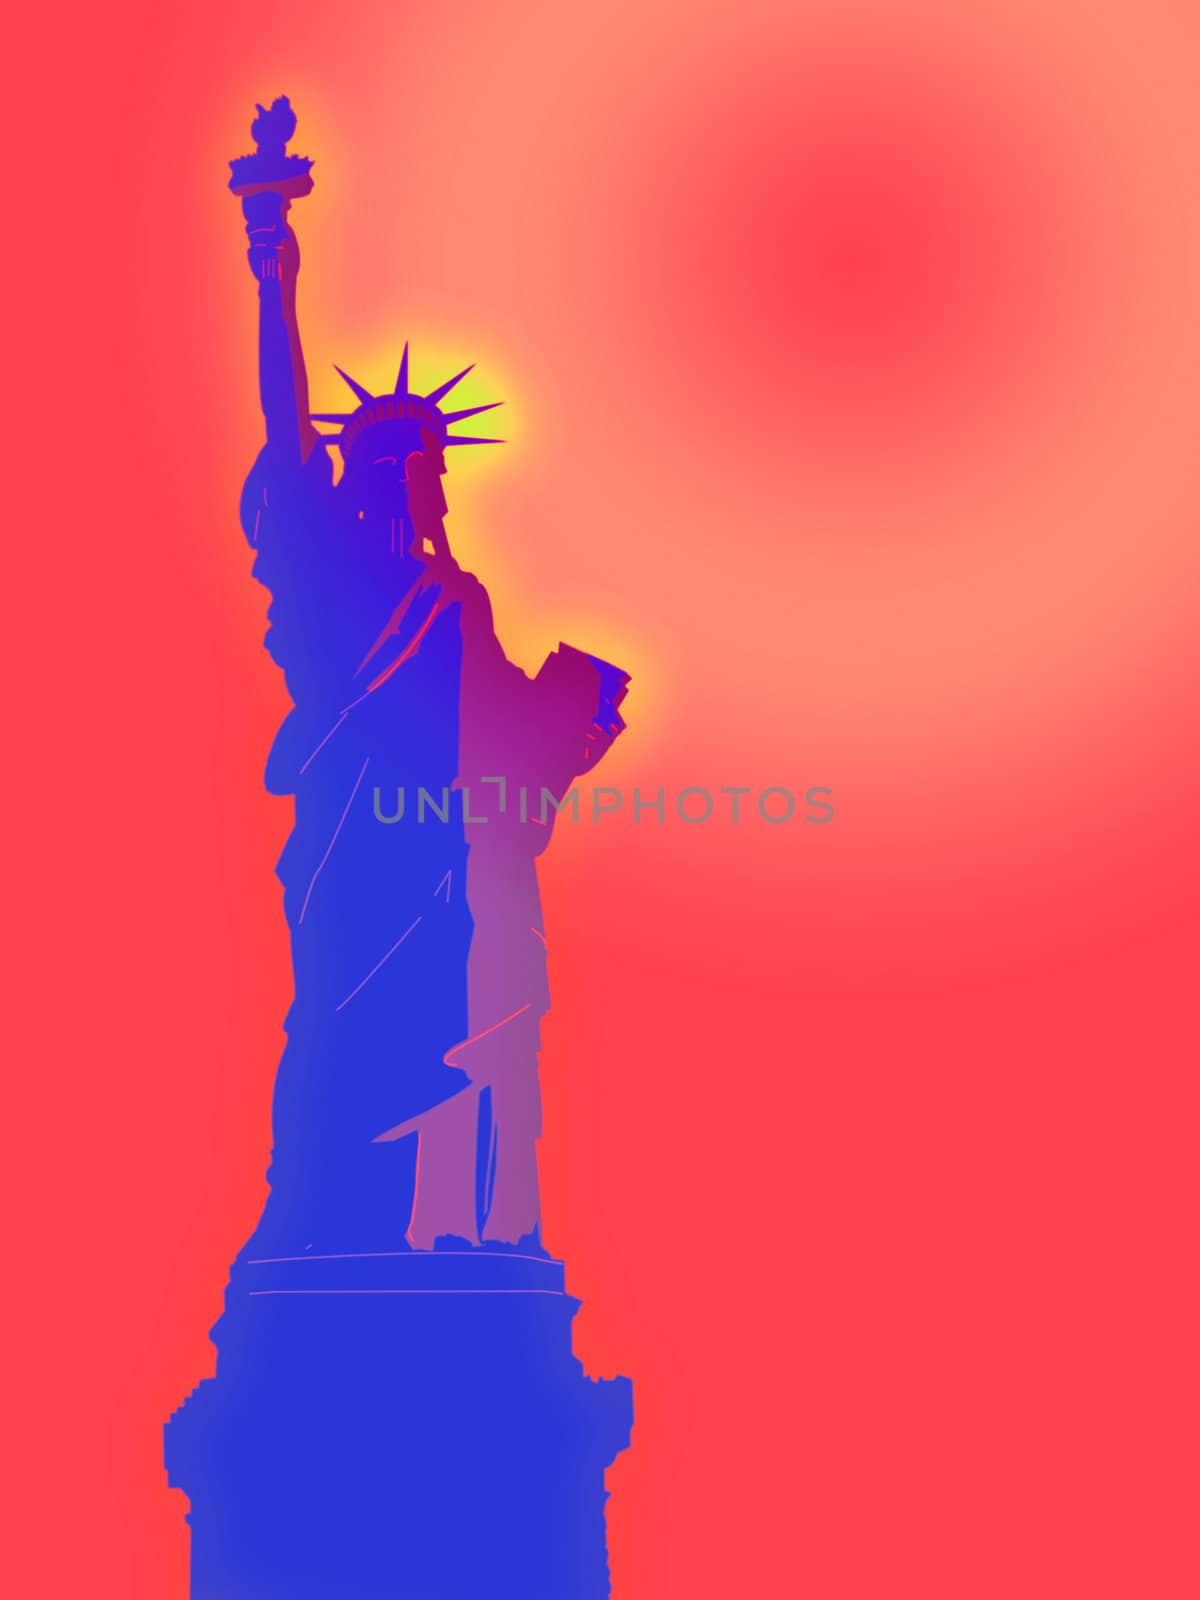 Statue of Liberty Illustration at Dawn with a Bright Sky